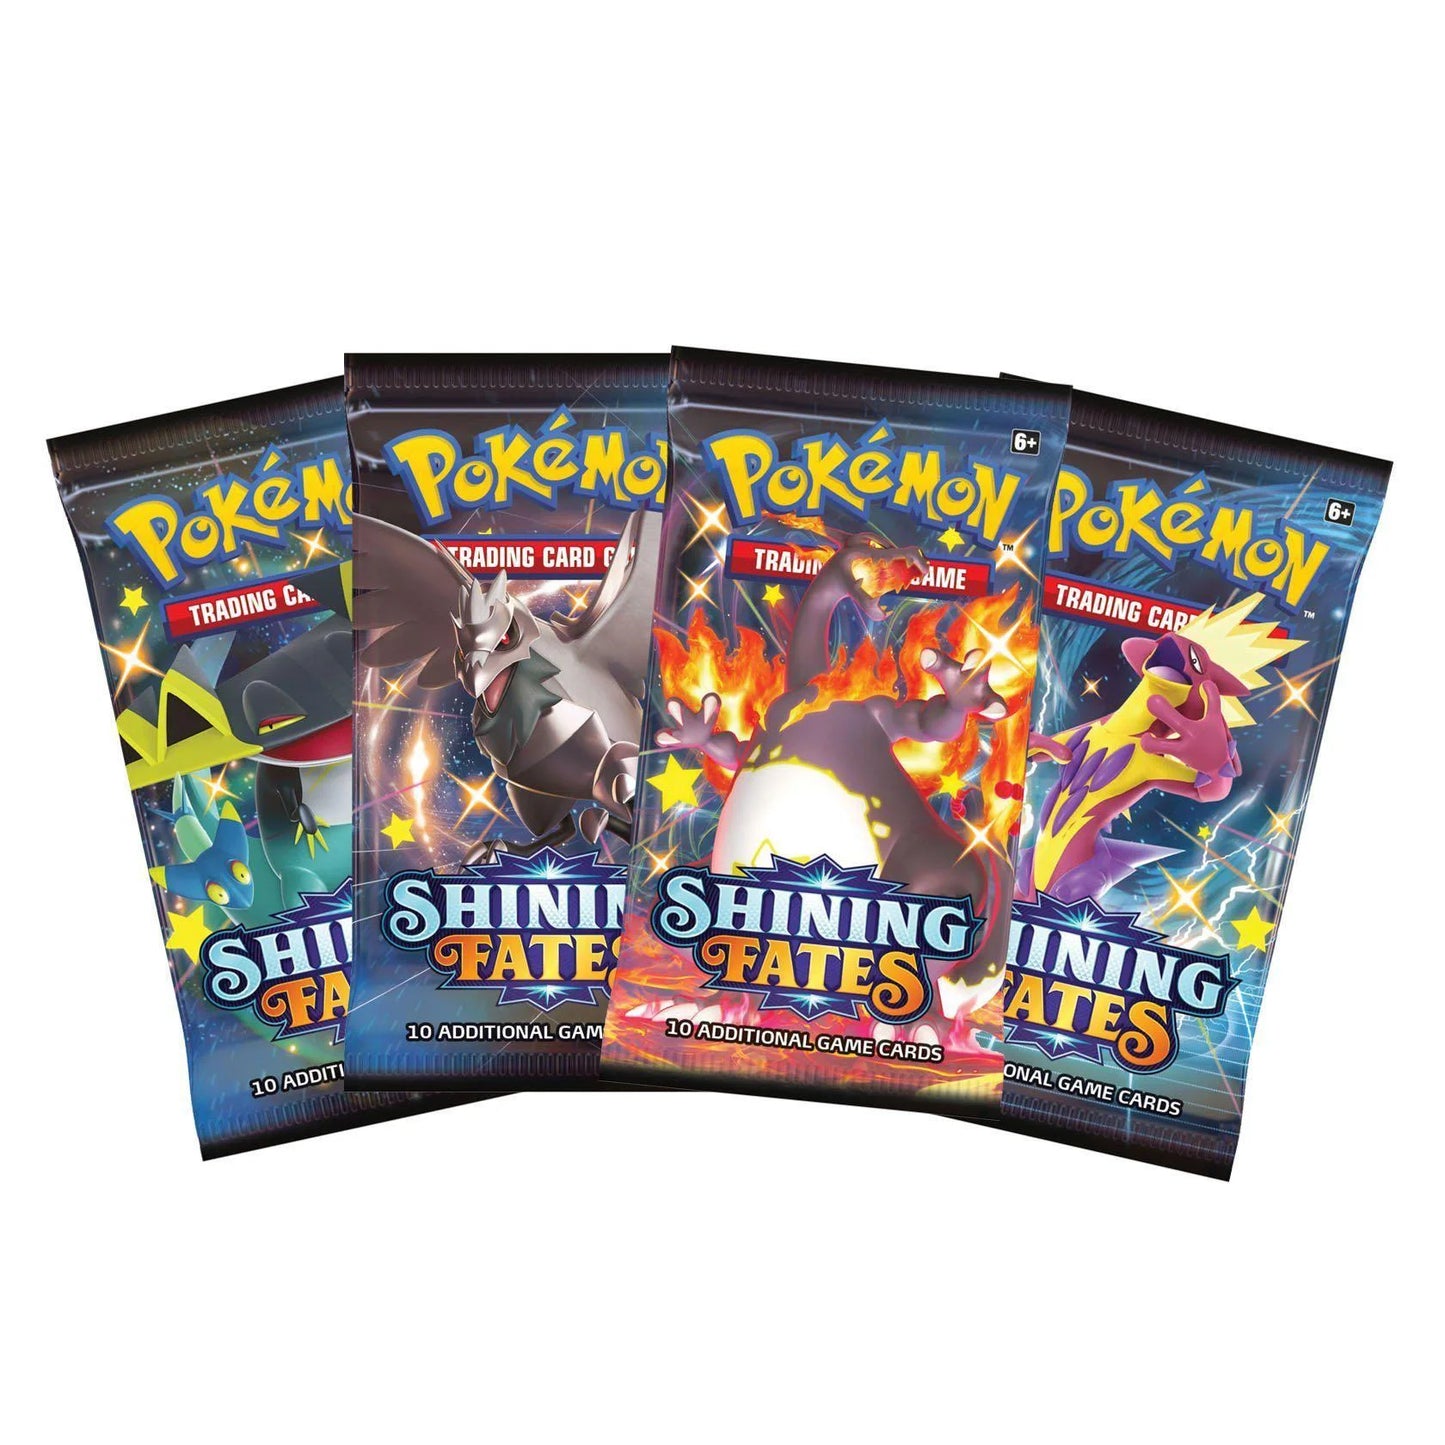 Pokémon: Shining fates Booster pack